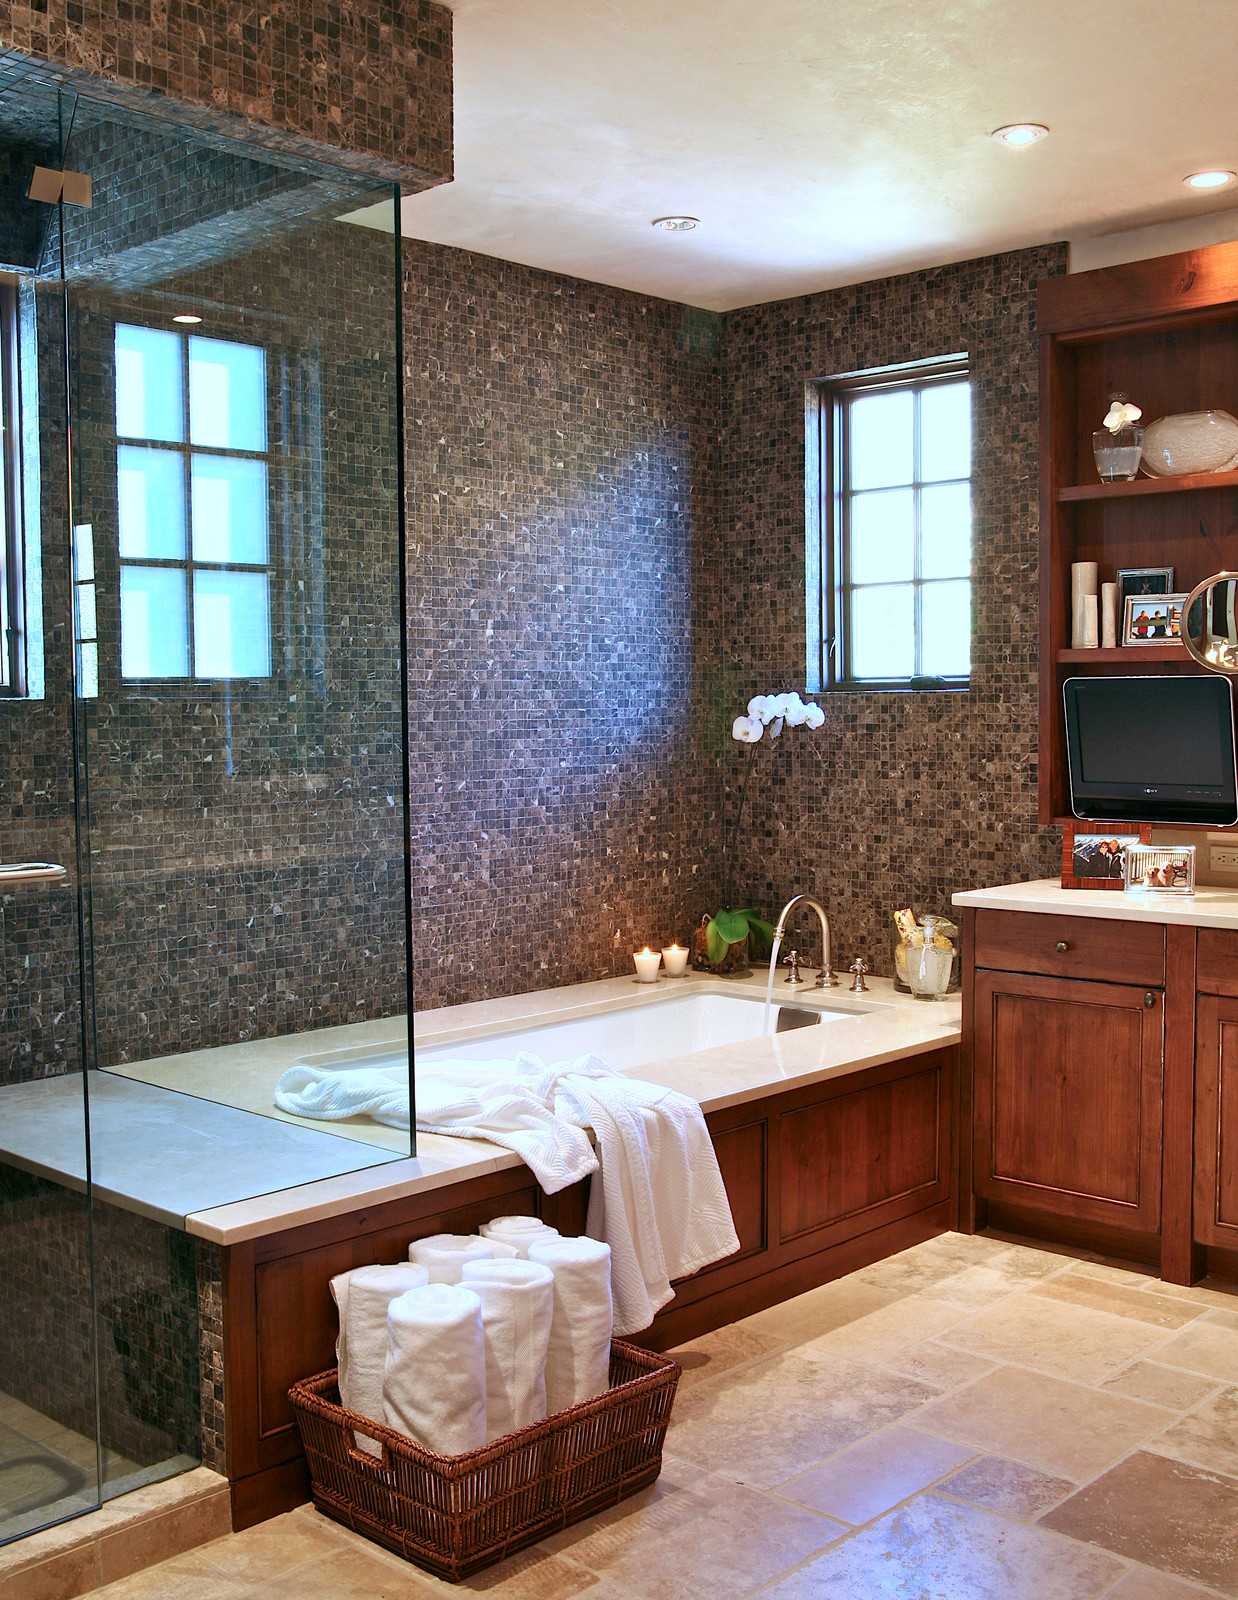 Bathroom Layout With Shower And Tub - BEST HOME DESIGN IDEAS